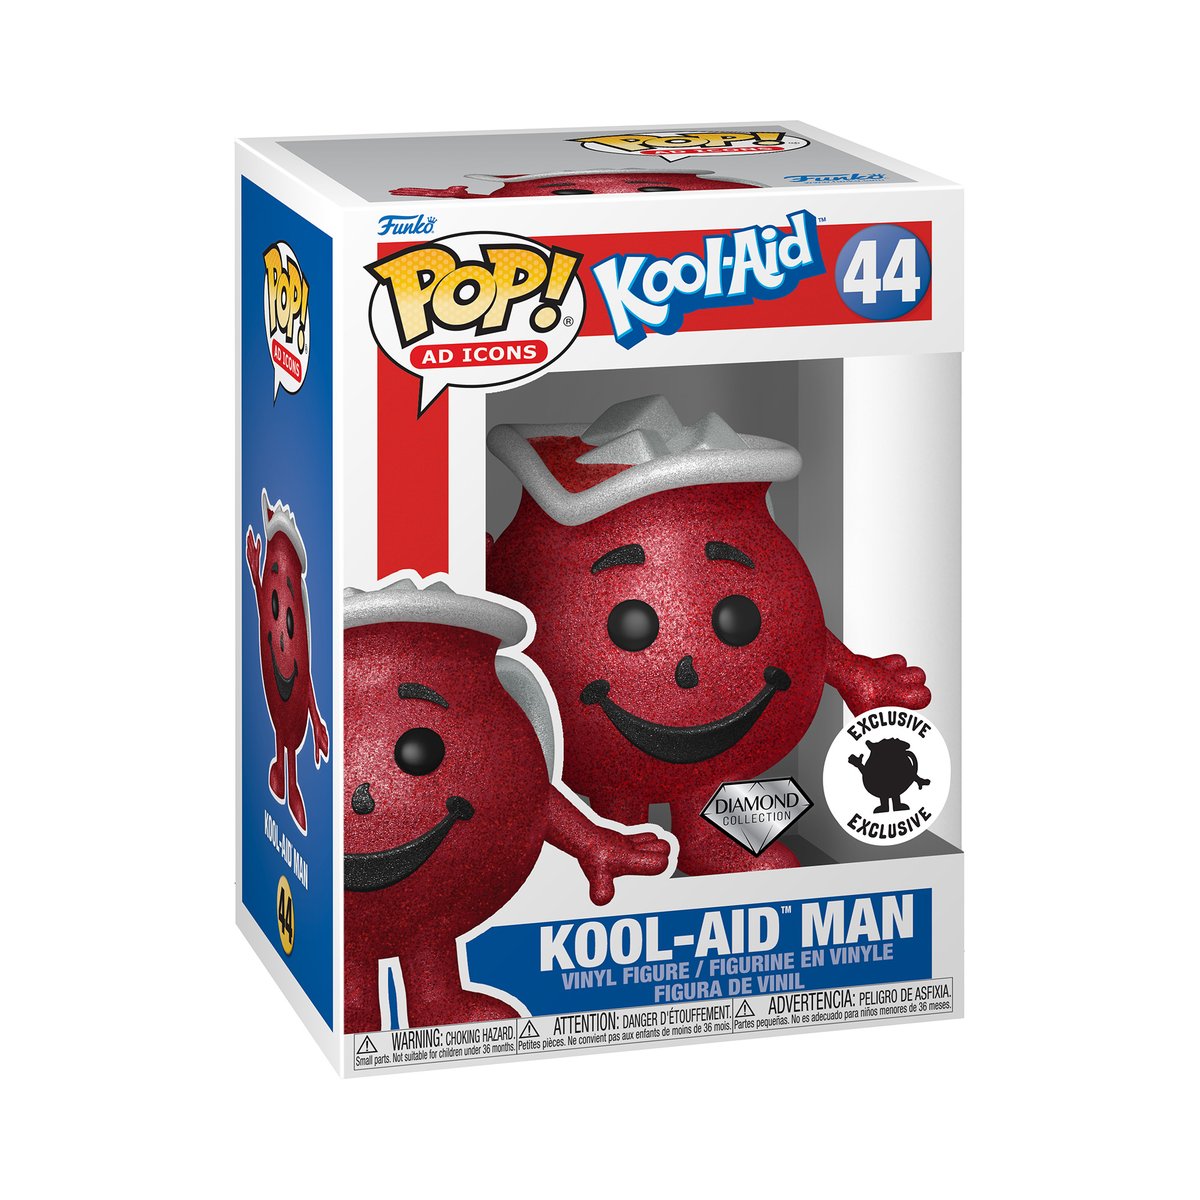 RT and follow @OriginalFunko for the chance to WIN the @ITSUGAR exclusive Kool-Aid Man POP! Not feeling lucky? Order now: bit.ly/3zcjfOP #Funko #FunkoPOP #Giveaway